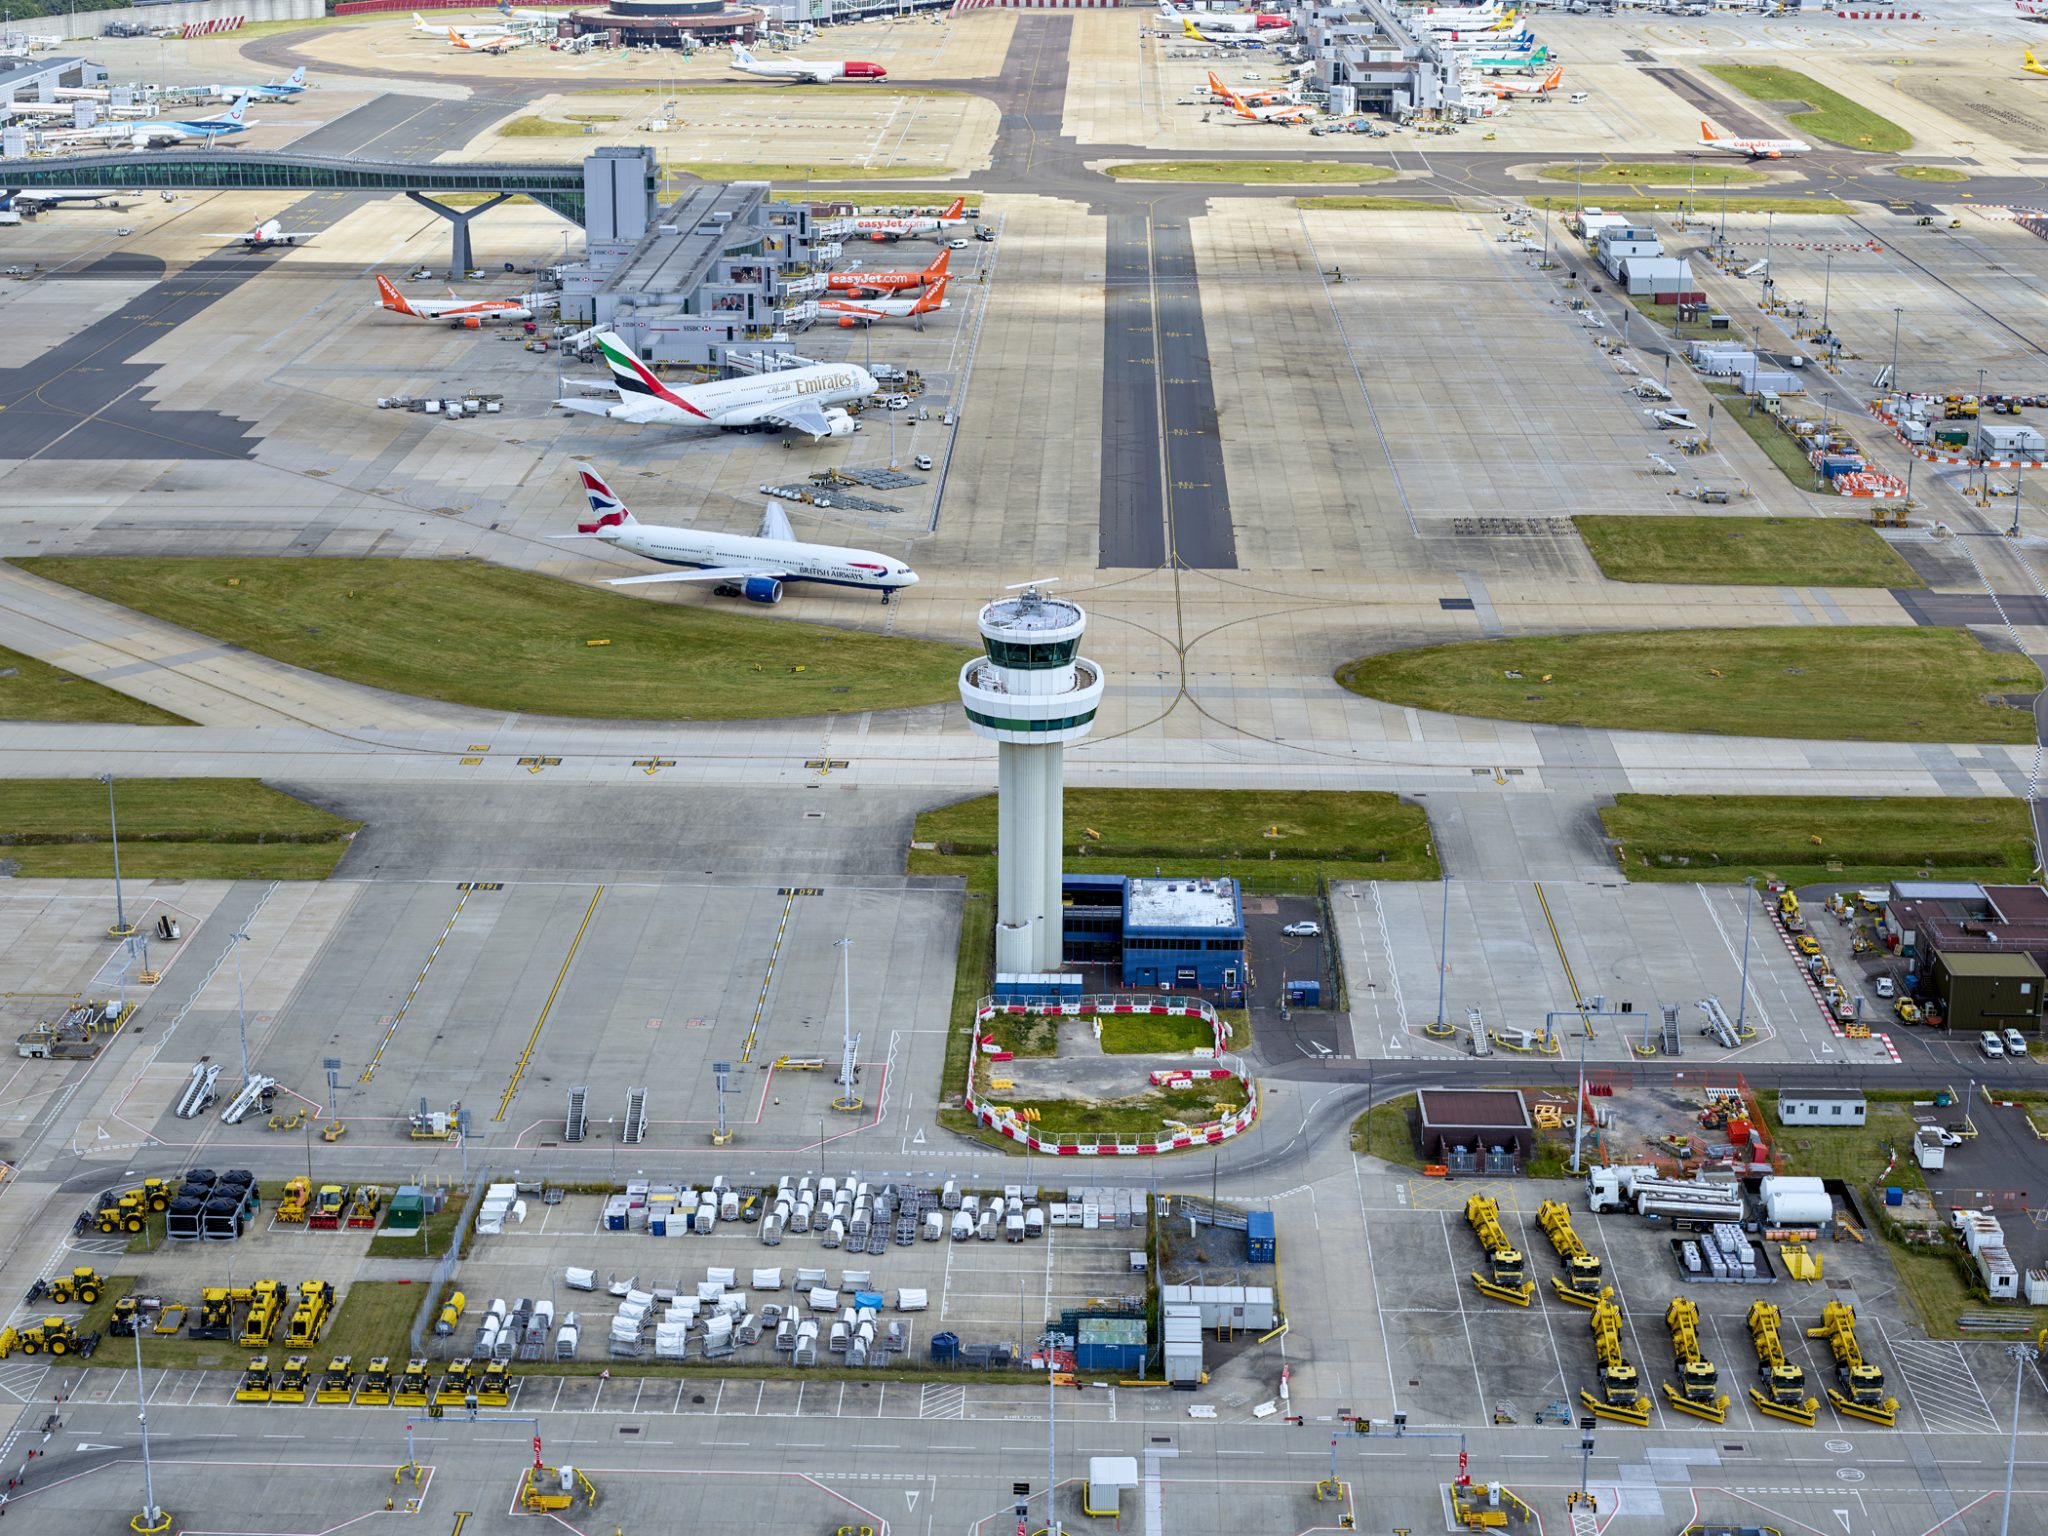 Delays at London Gatwick after check-in outage